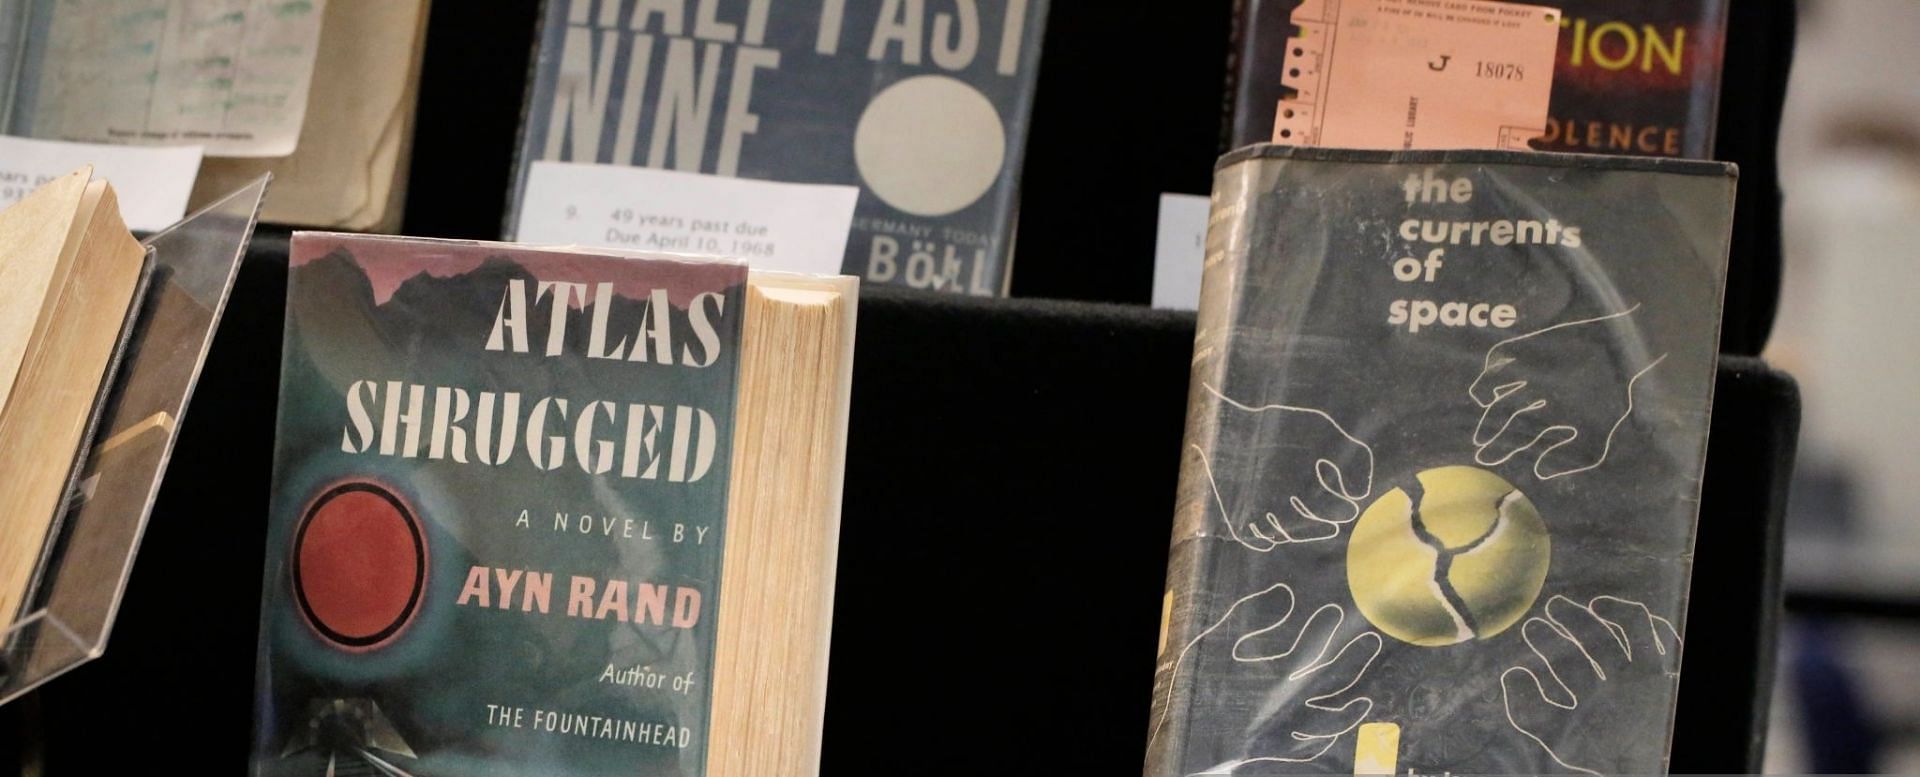 &#039;Atlas Shrugged&#039; faced severe criticism upon its publication in 1957 (Image via Lea Suzuki/Getty Images)